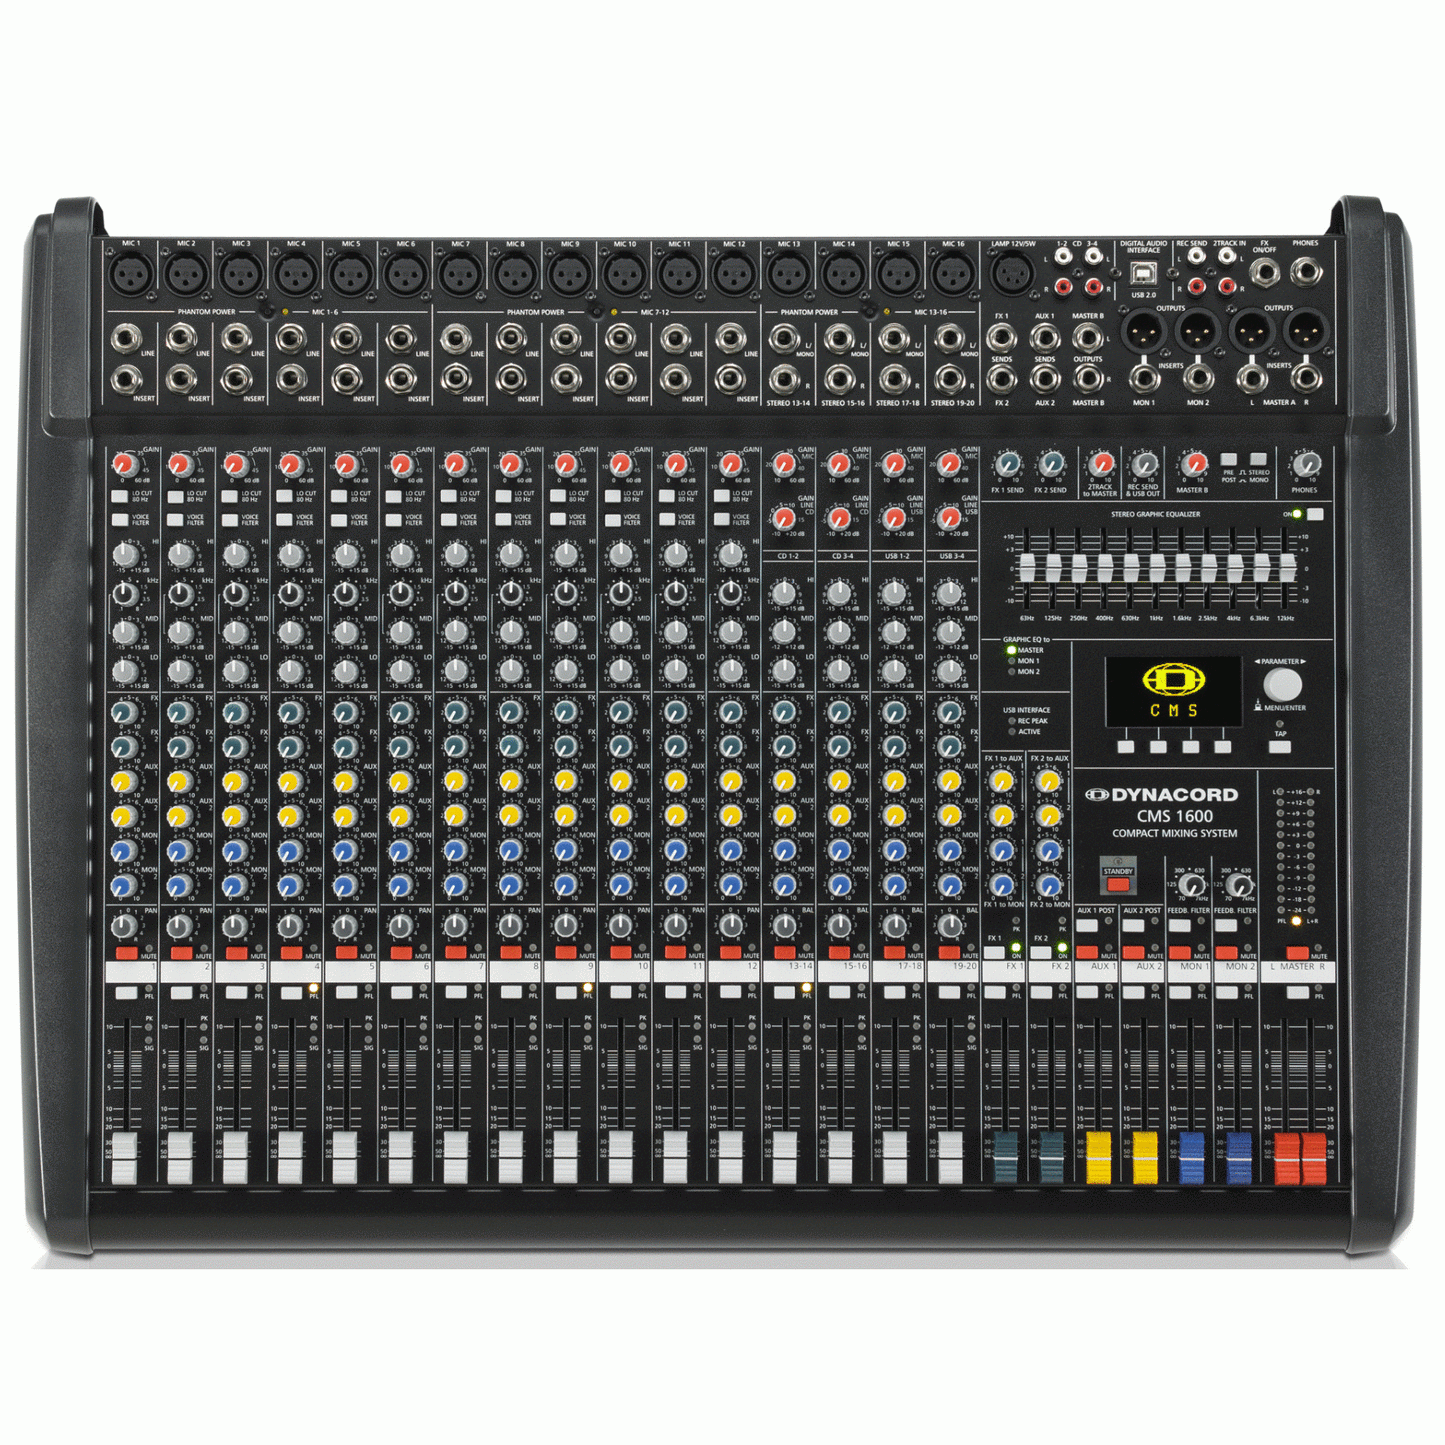 Dynacord CMS1600-3 Mixing Desk